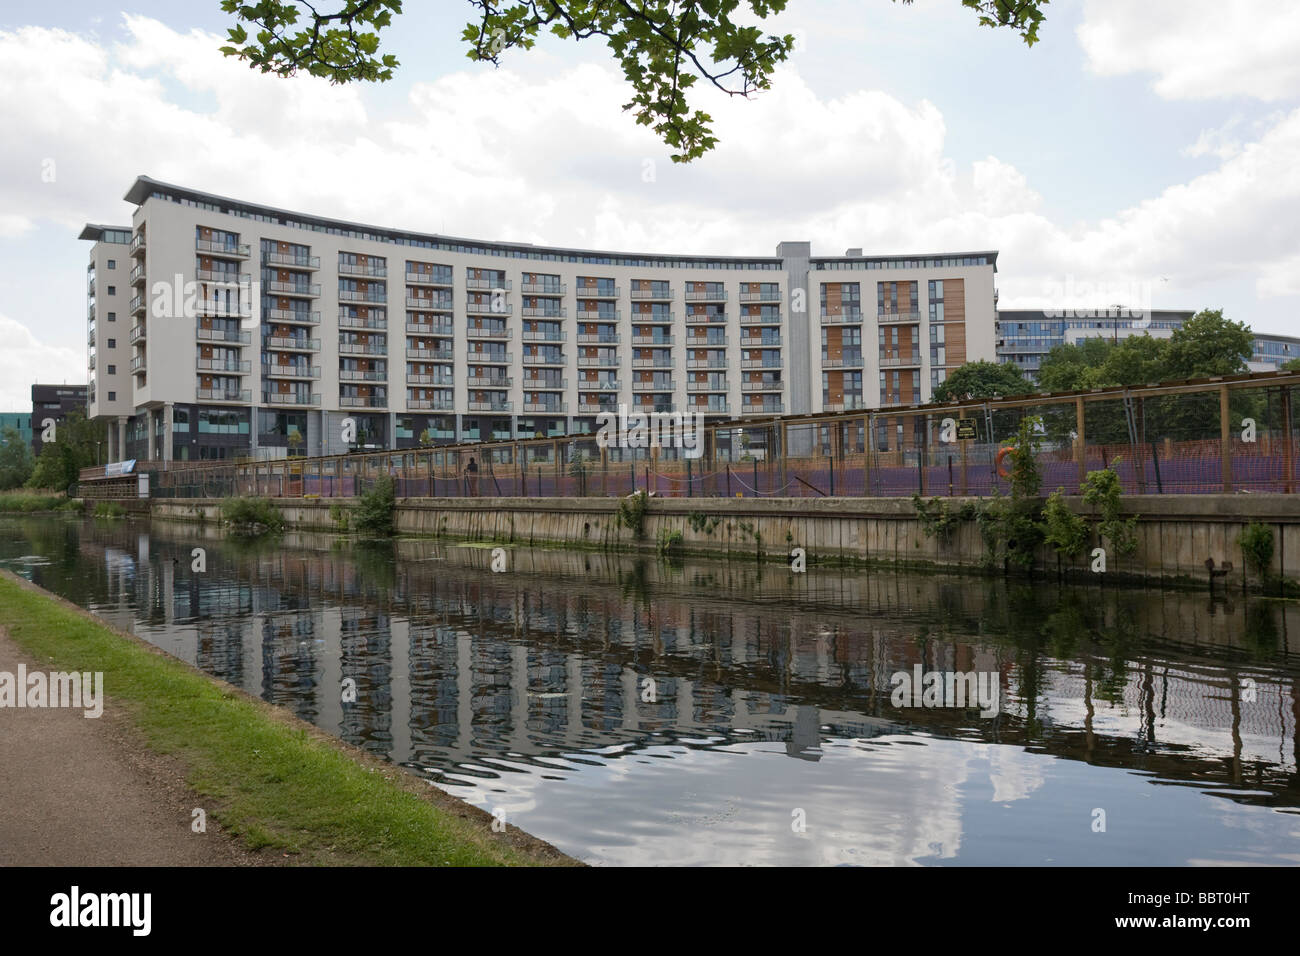 2012 Olympics site, nearby Modern apartments overlooking Regents Canal East Tower Hamlets London GB UK Stock Photo